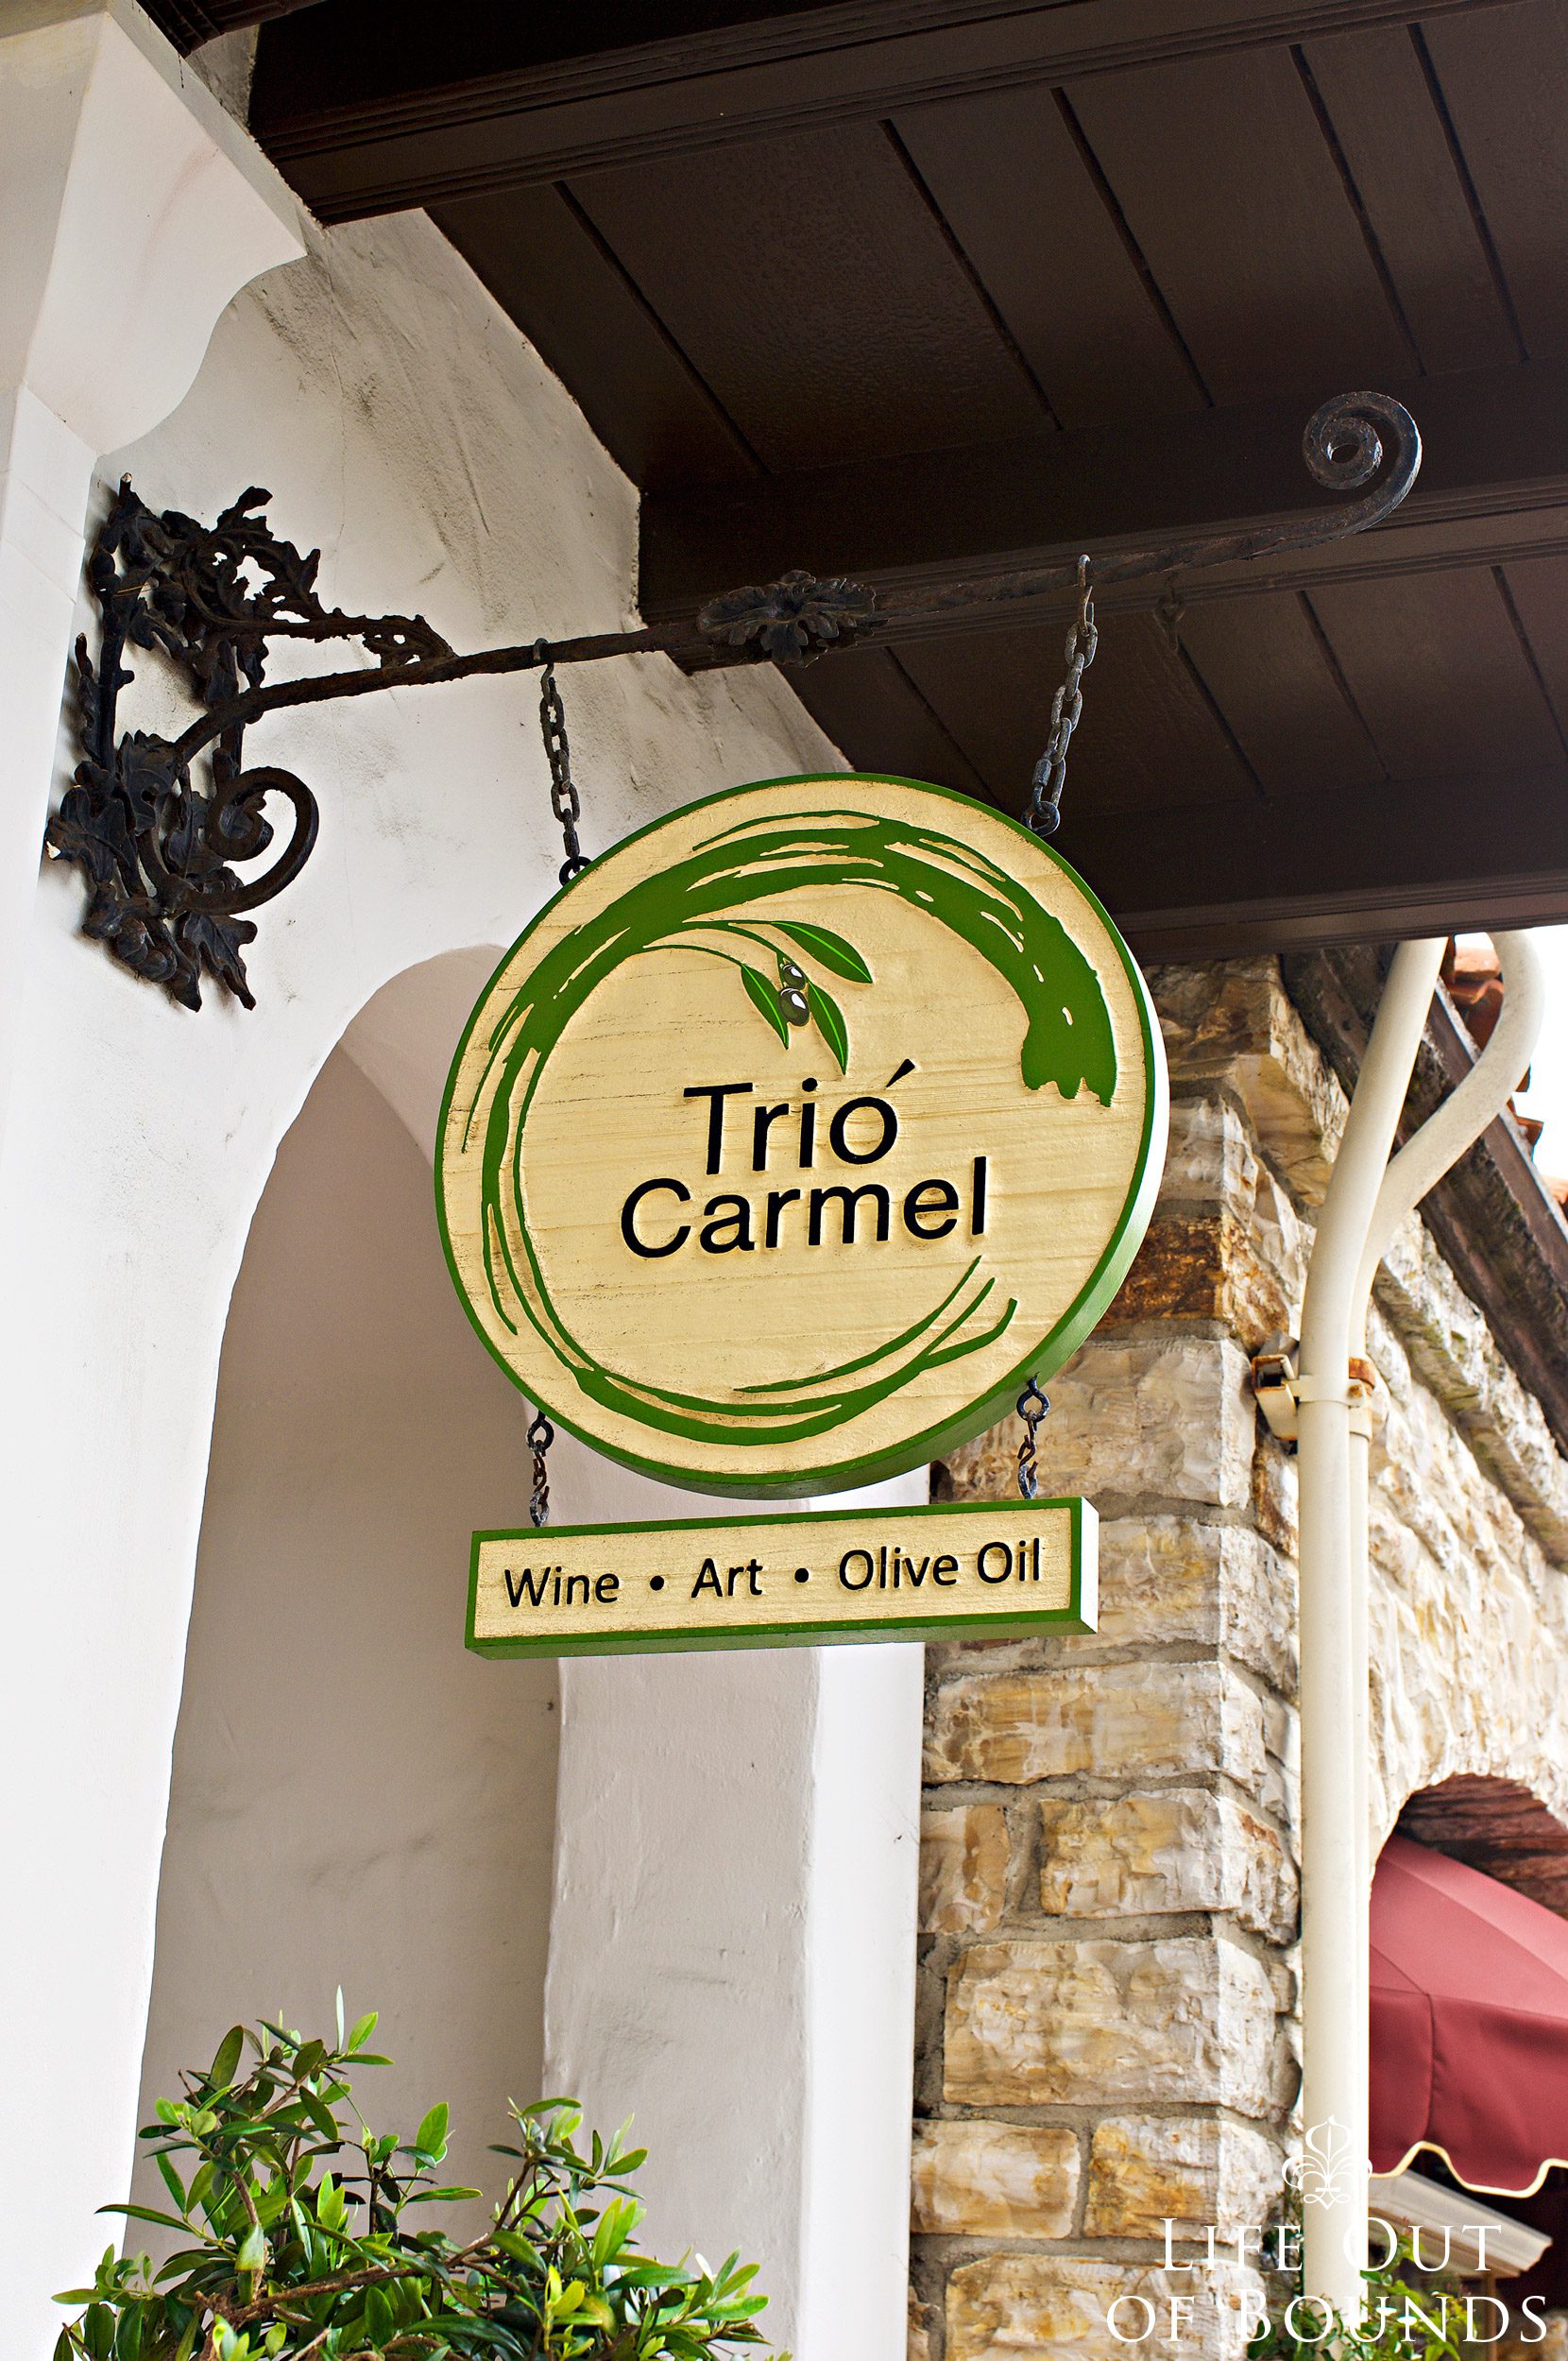 Wine-art-and-olive-oil-at-Trio-Carmel-in-Carmel-by-the-Sea-California